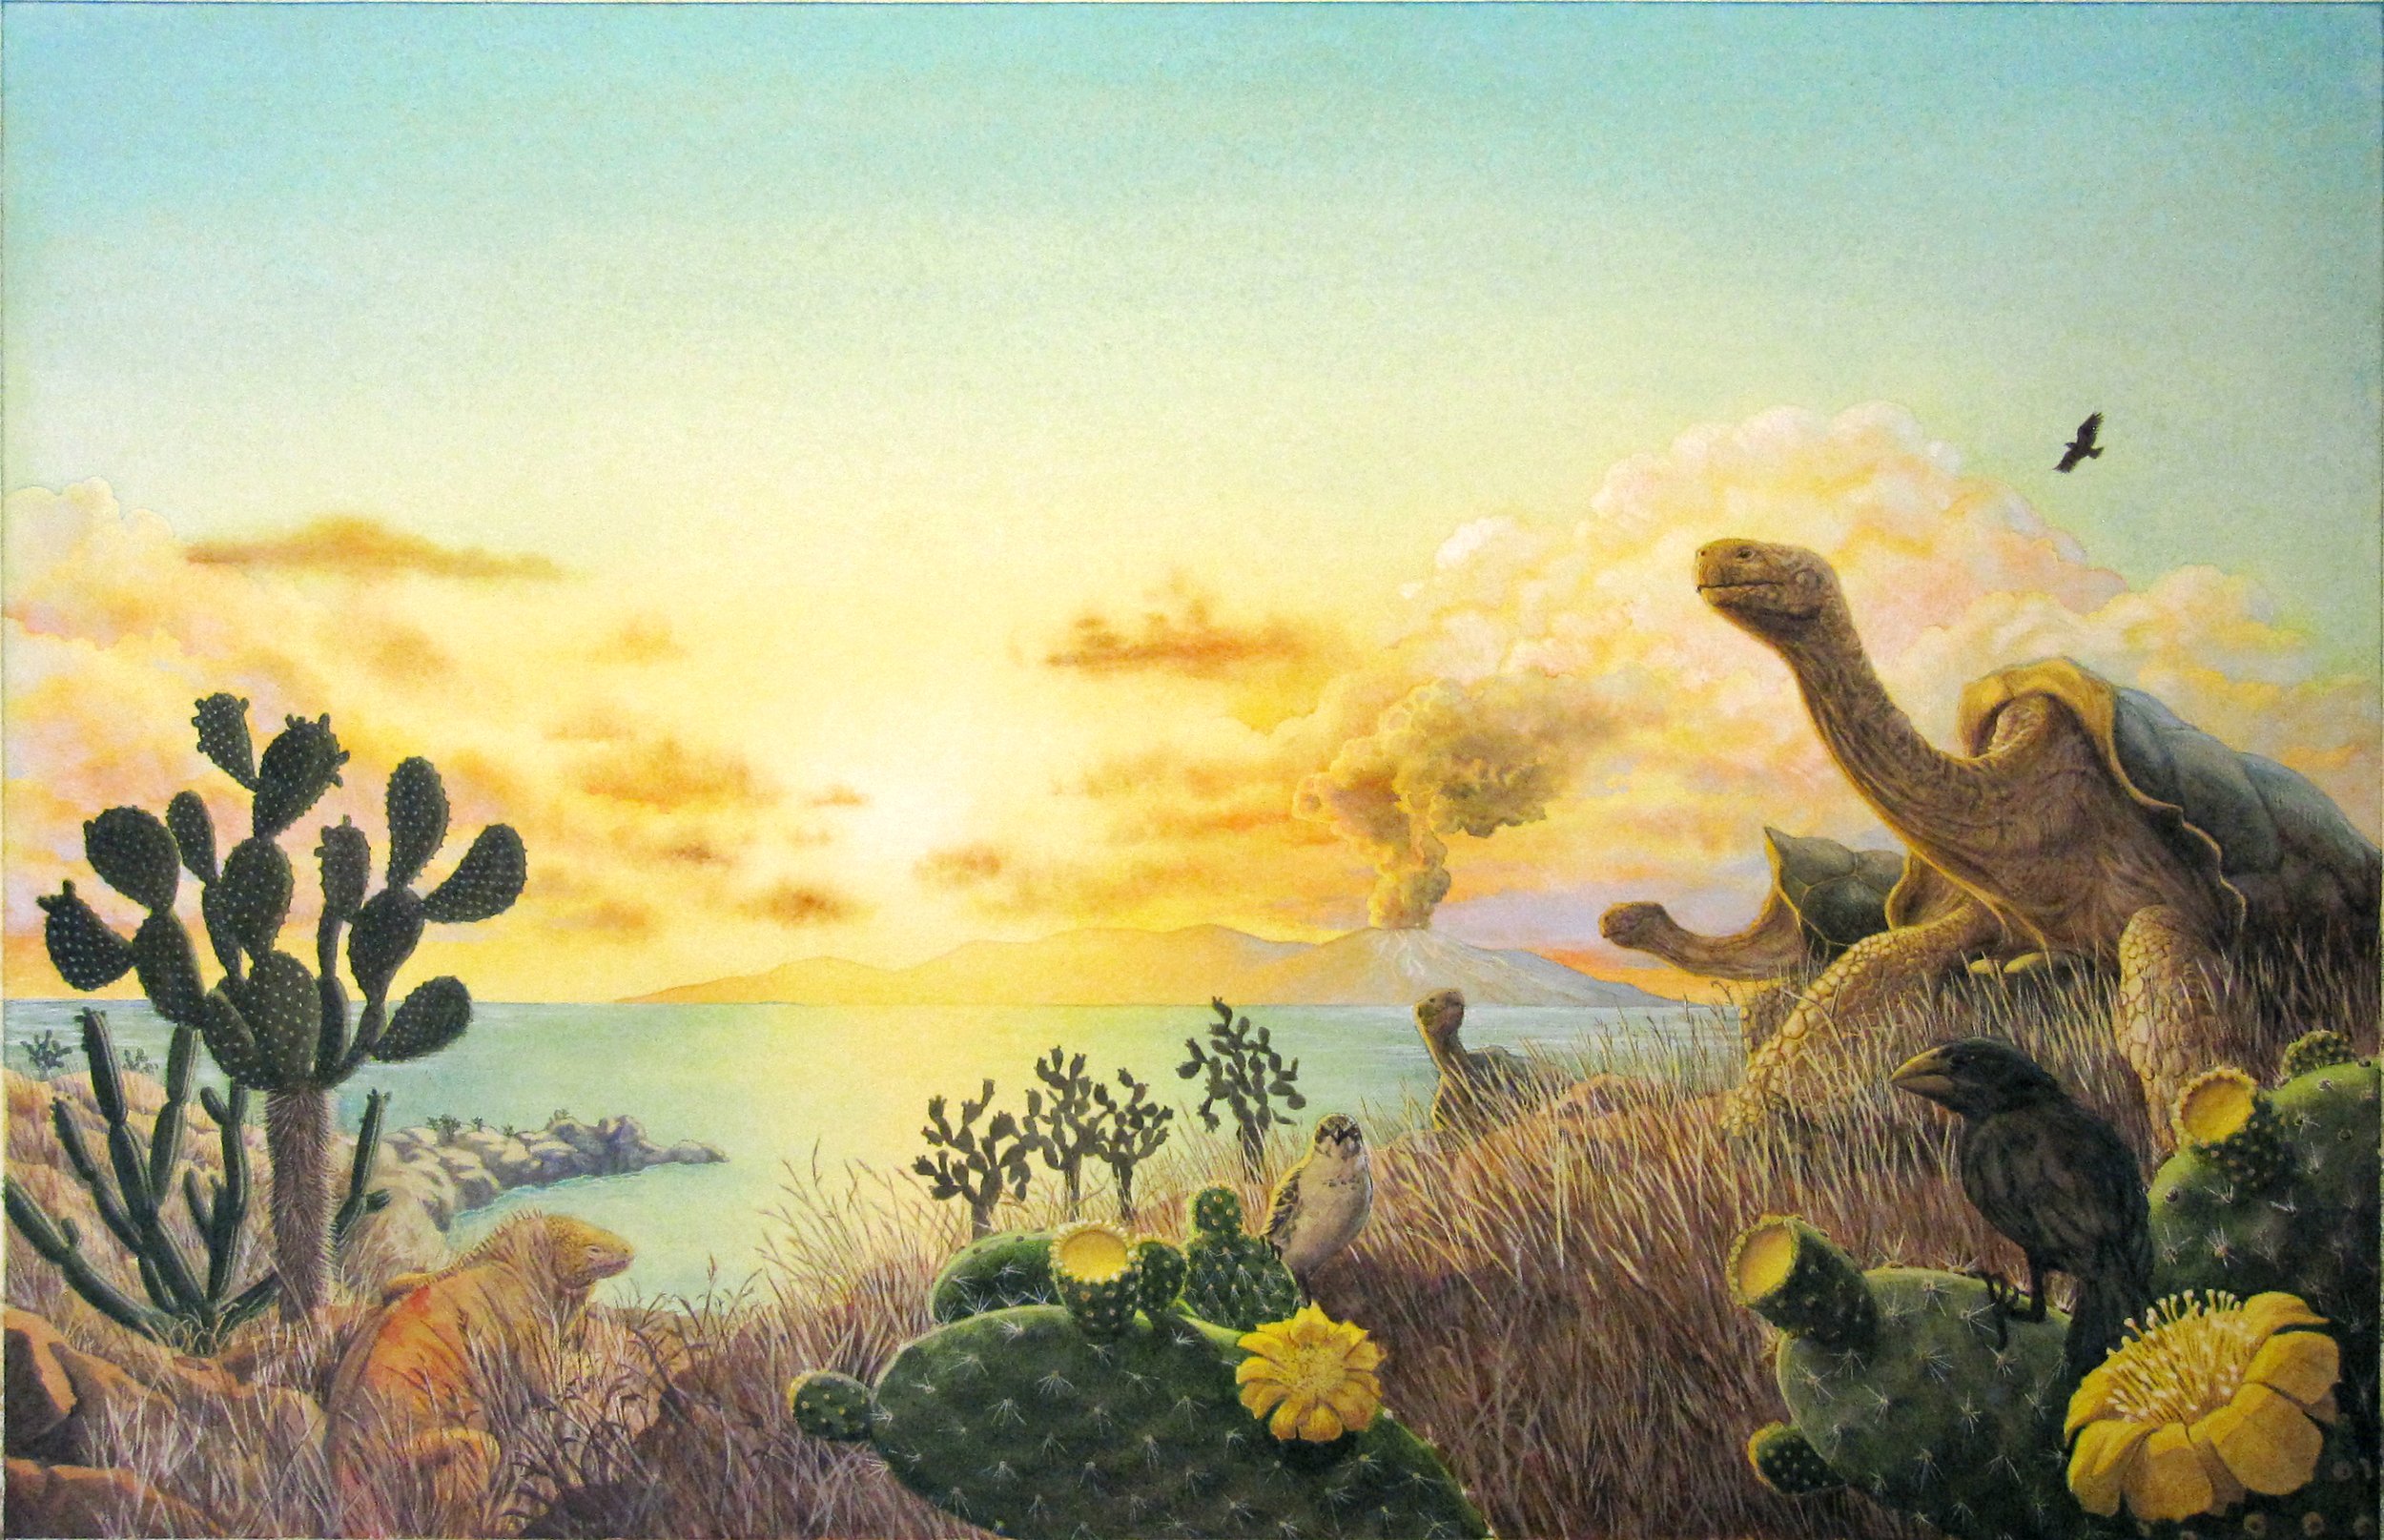 Jason Chin; Book Cover Illustration, 2012; Watercolor and gouache; From "Island: A Story of the Galapagos"